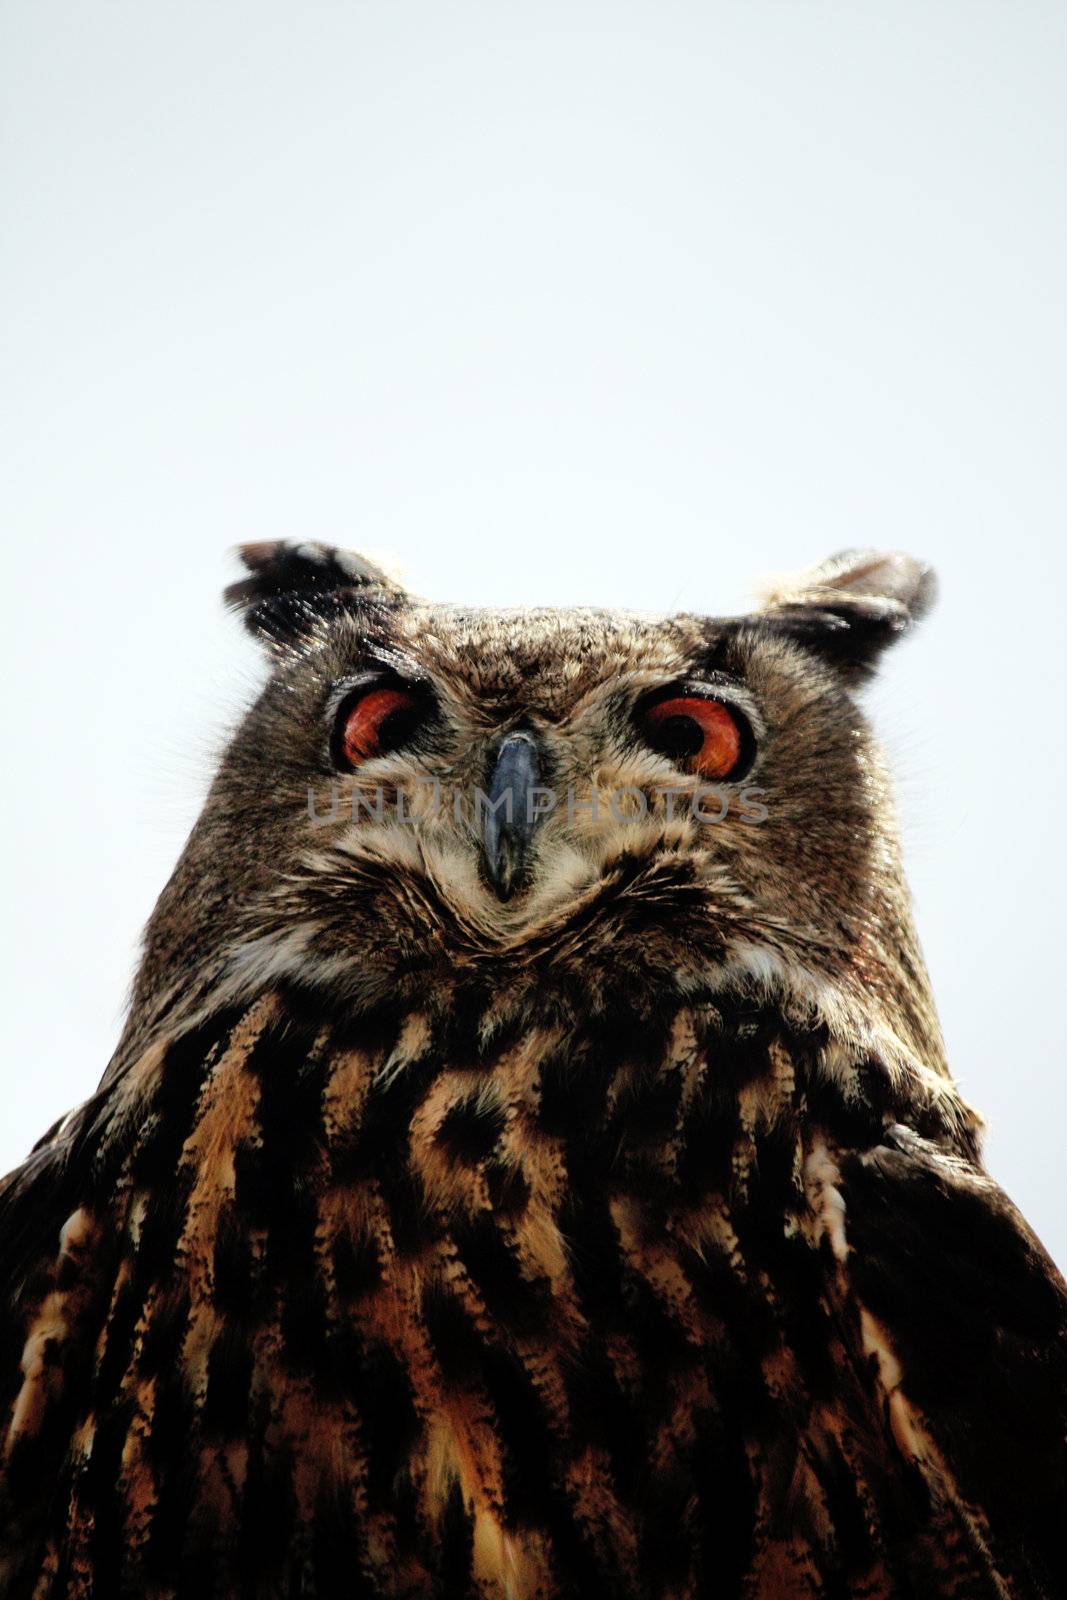 Close up view of the Rock Eagle-Owl from below.